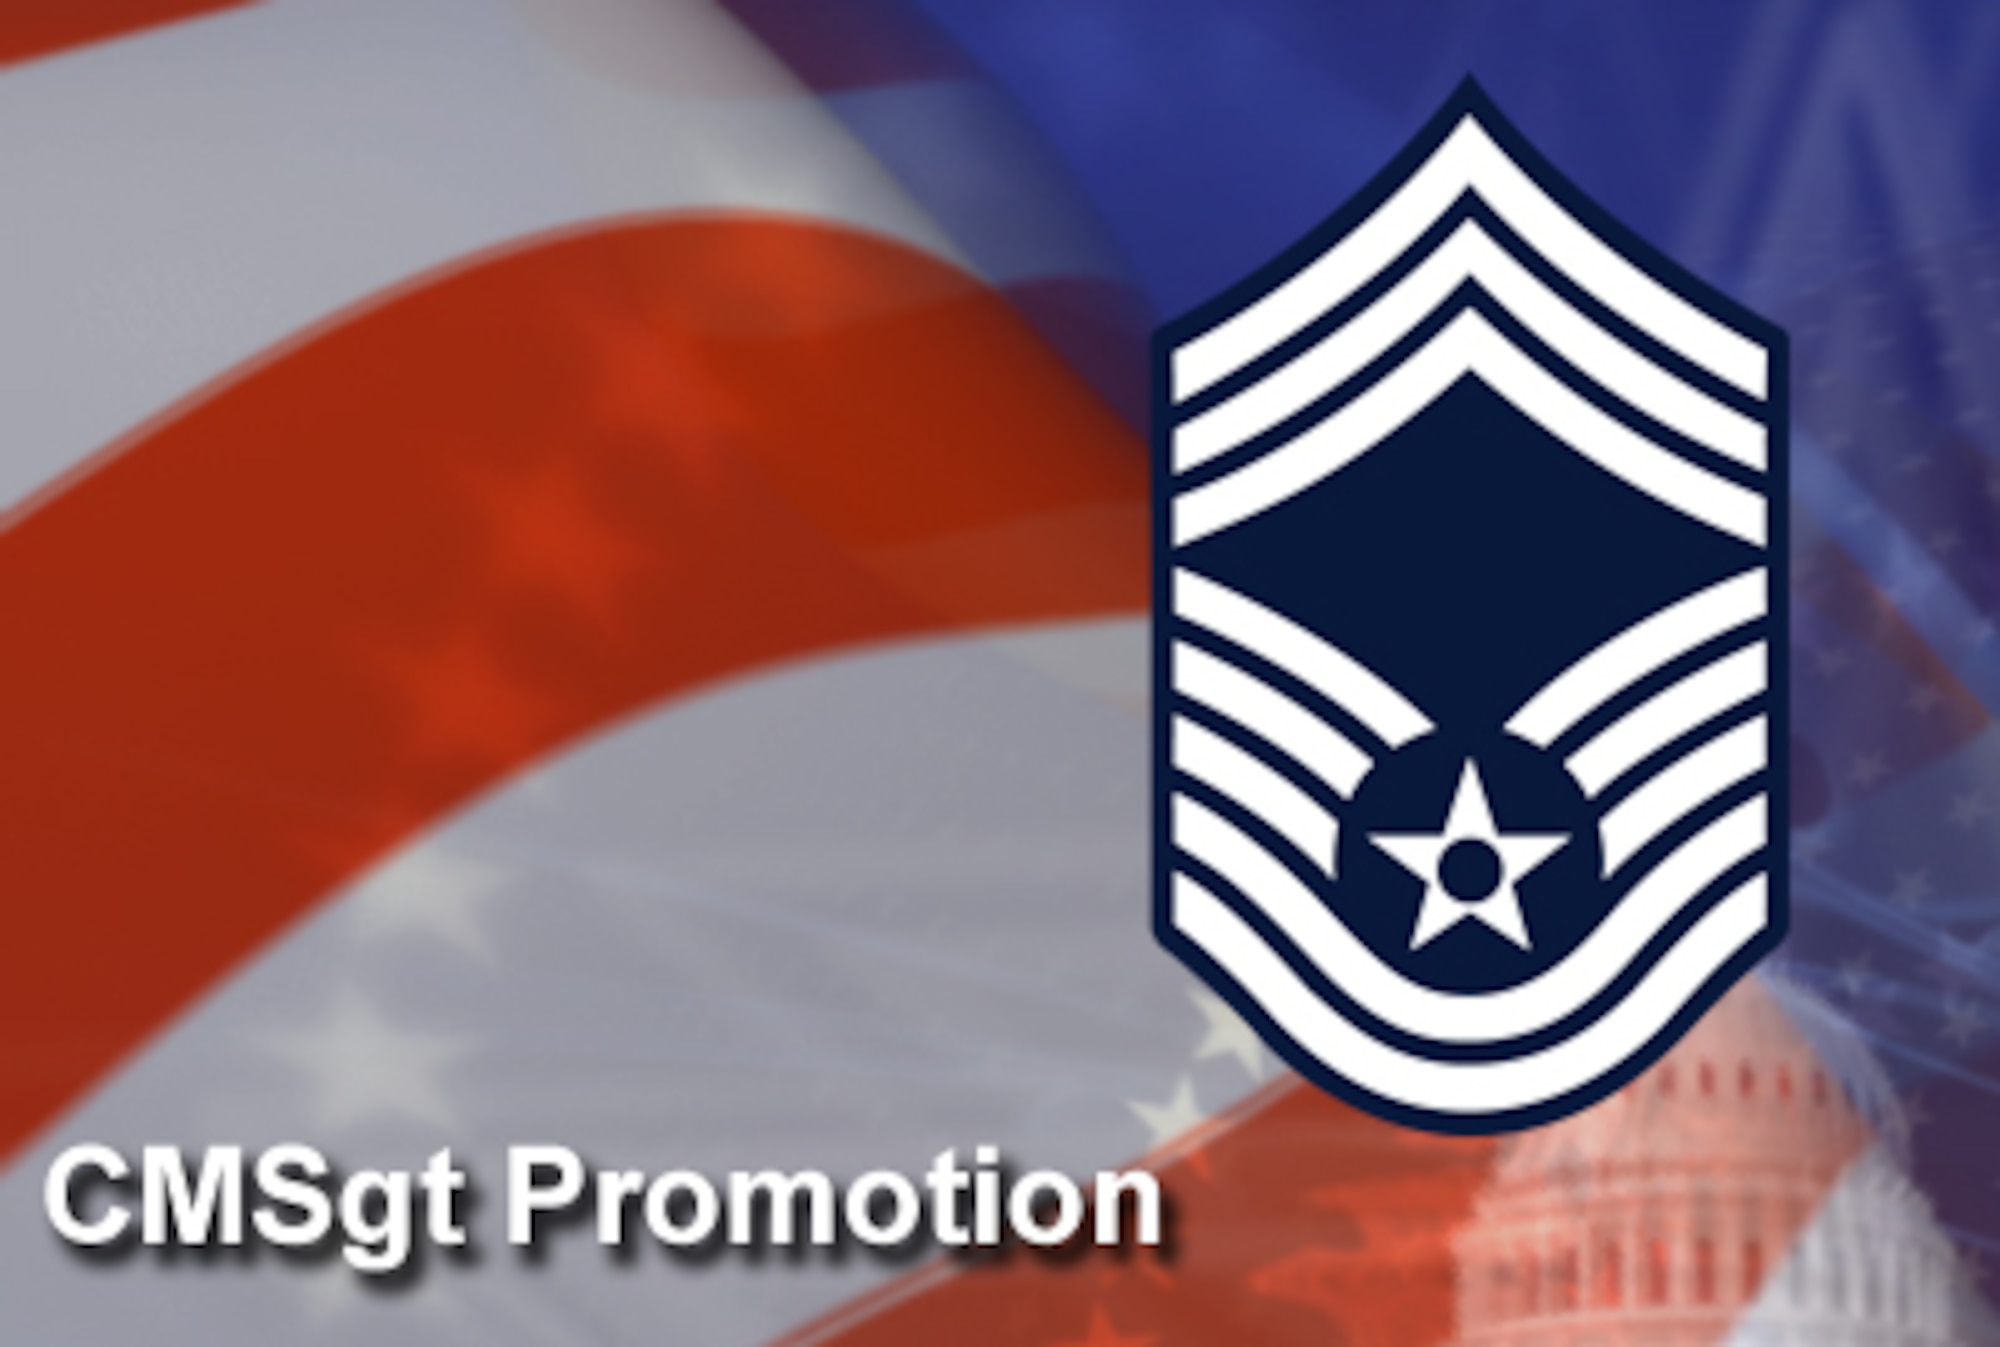 The Chief Master Sergeant promotion list will be released publicly Nov. 5, 2009, at 8 a.m. CST on the Air Force Personnel Center's public Web site and on AFPC's "Ask" site at Spotlight and Enlisted Promotions. At 8 a.m. CST Nov. 5, 2009, Airmen can access their score notices on the virtual MPF and the Air Force Portal.